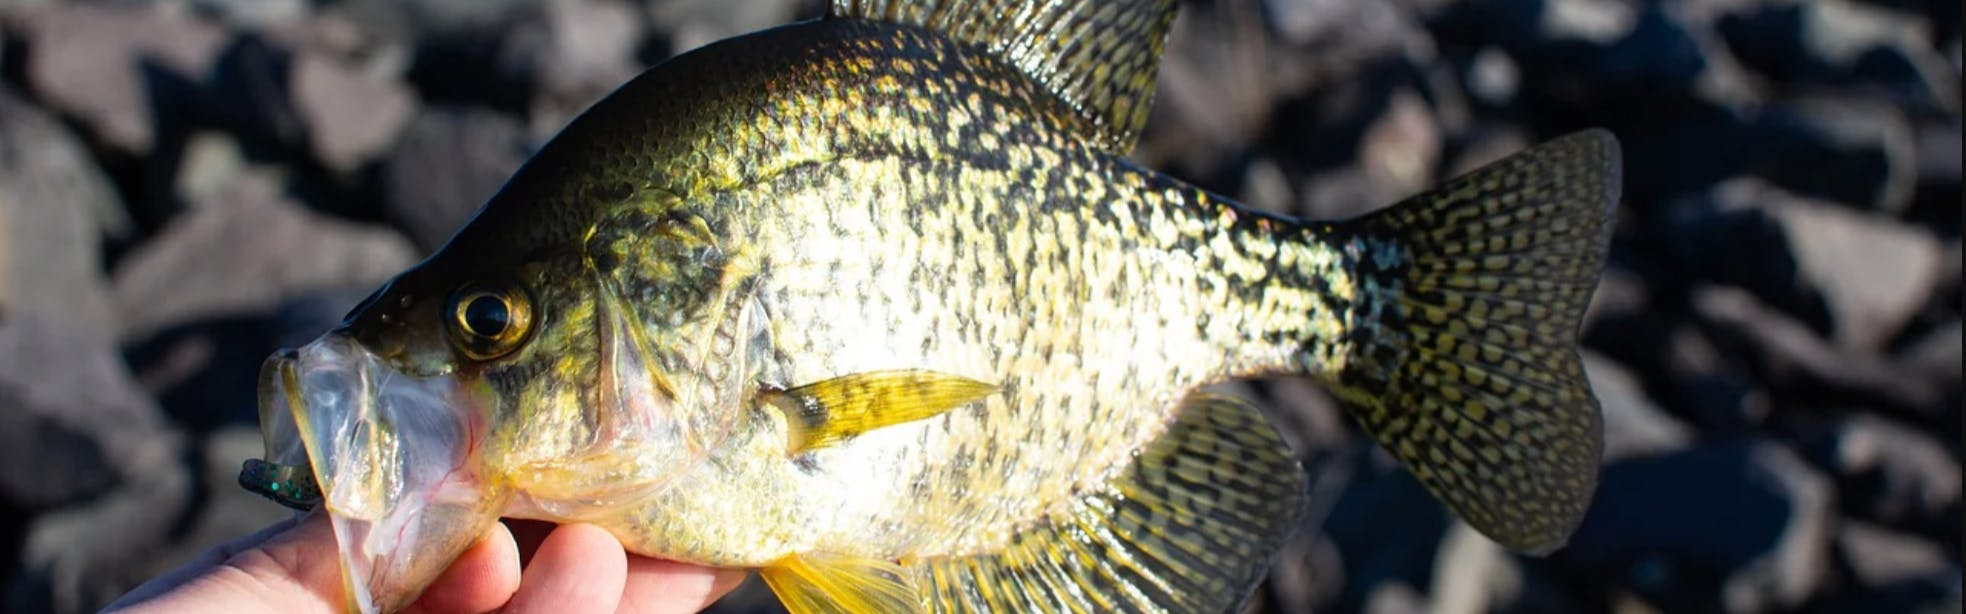 Crappie Fishing Explained: The Best Bait, Lures, and More